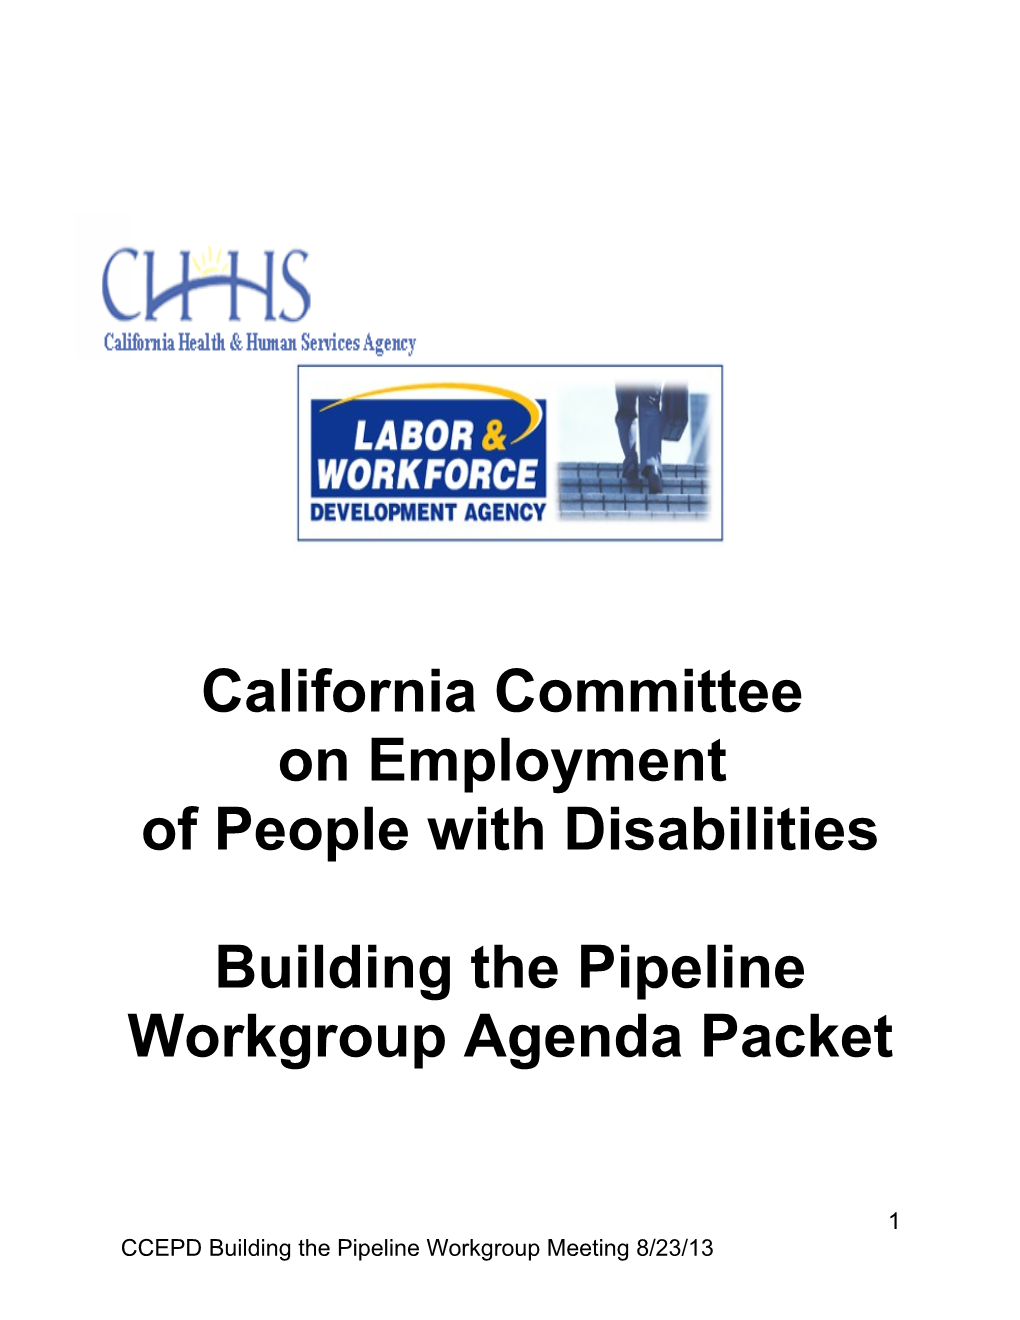 Building the Pipeline Workgroup Agenda Packet